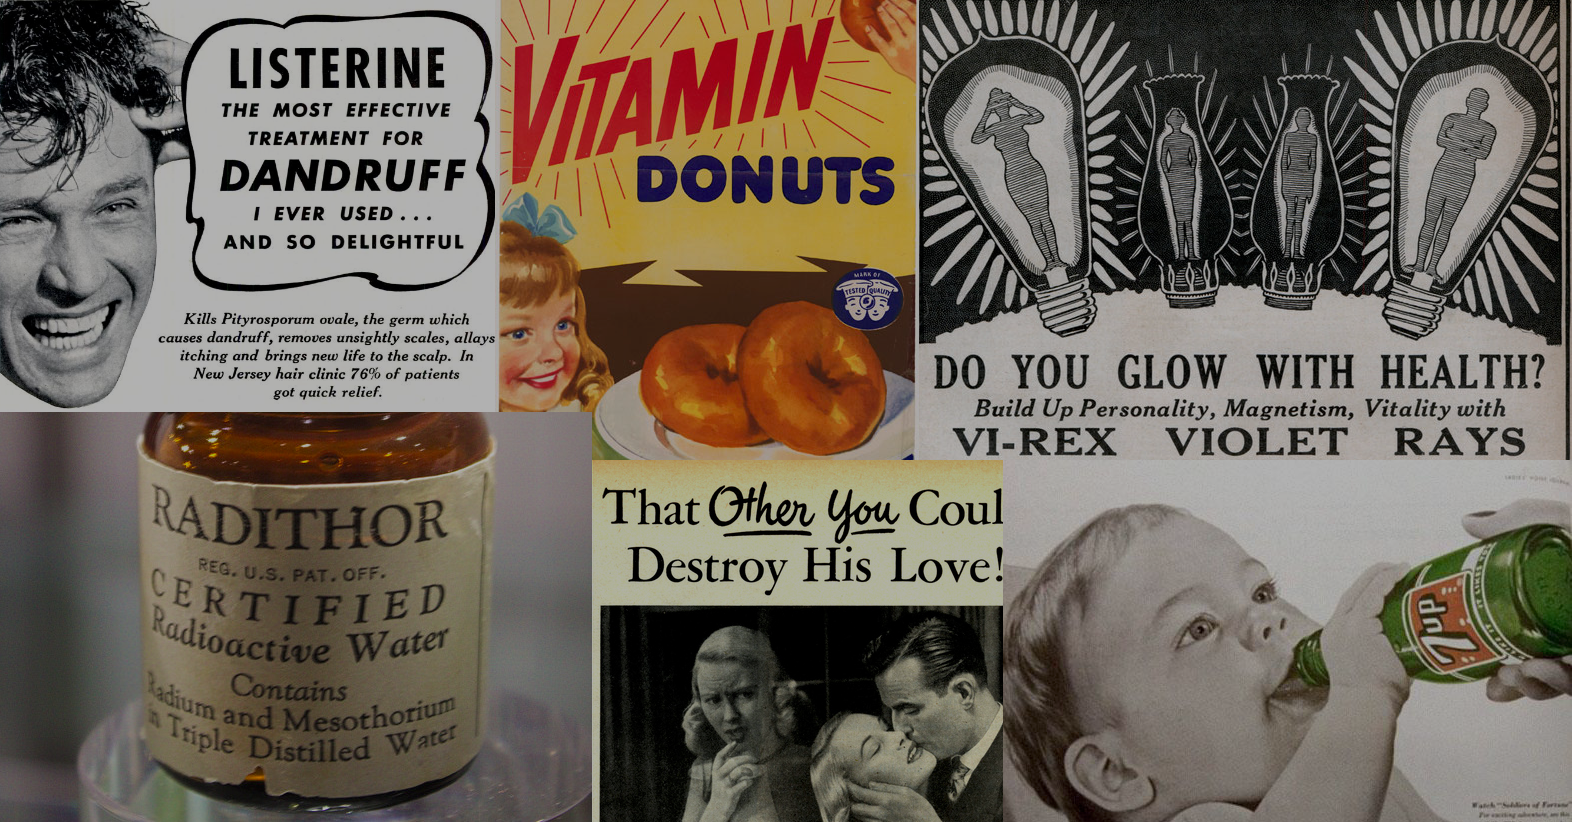 7 “Health” Products From The Past That Would Never Make It Onto Shelves Today